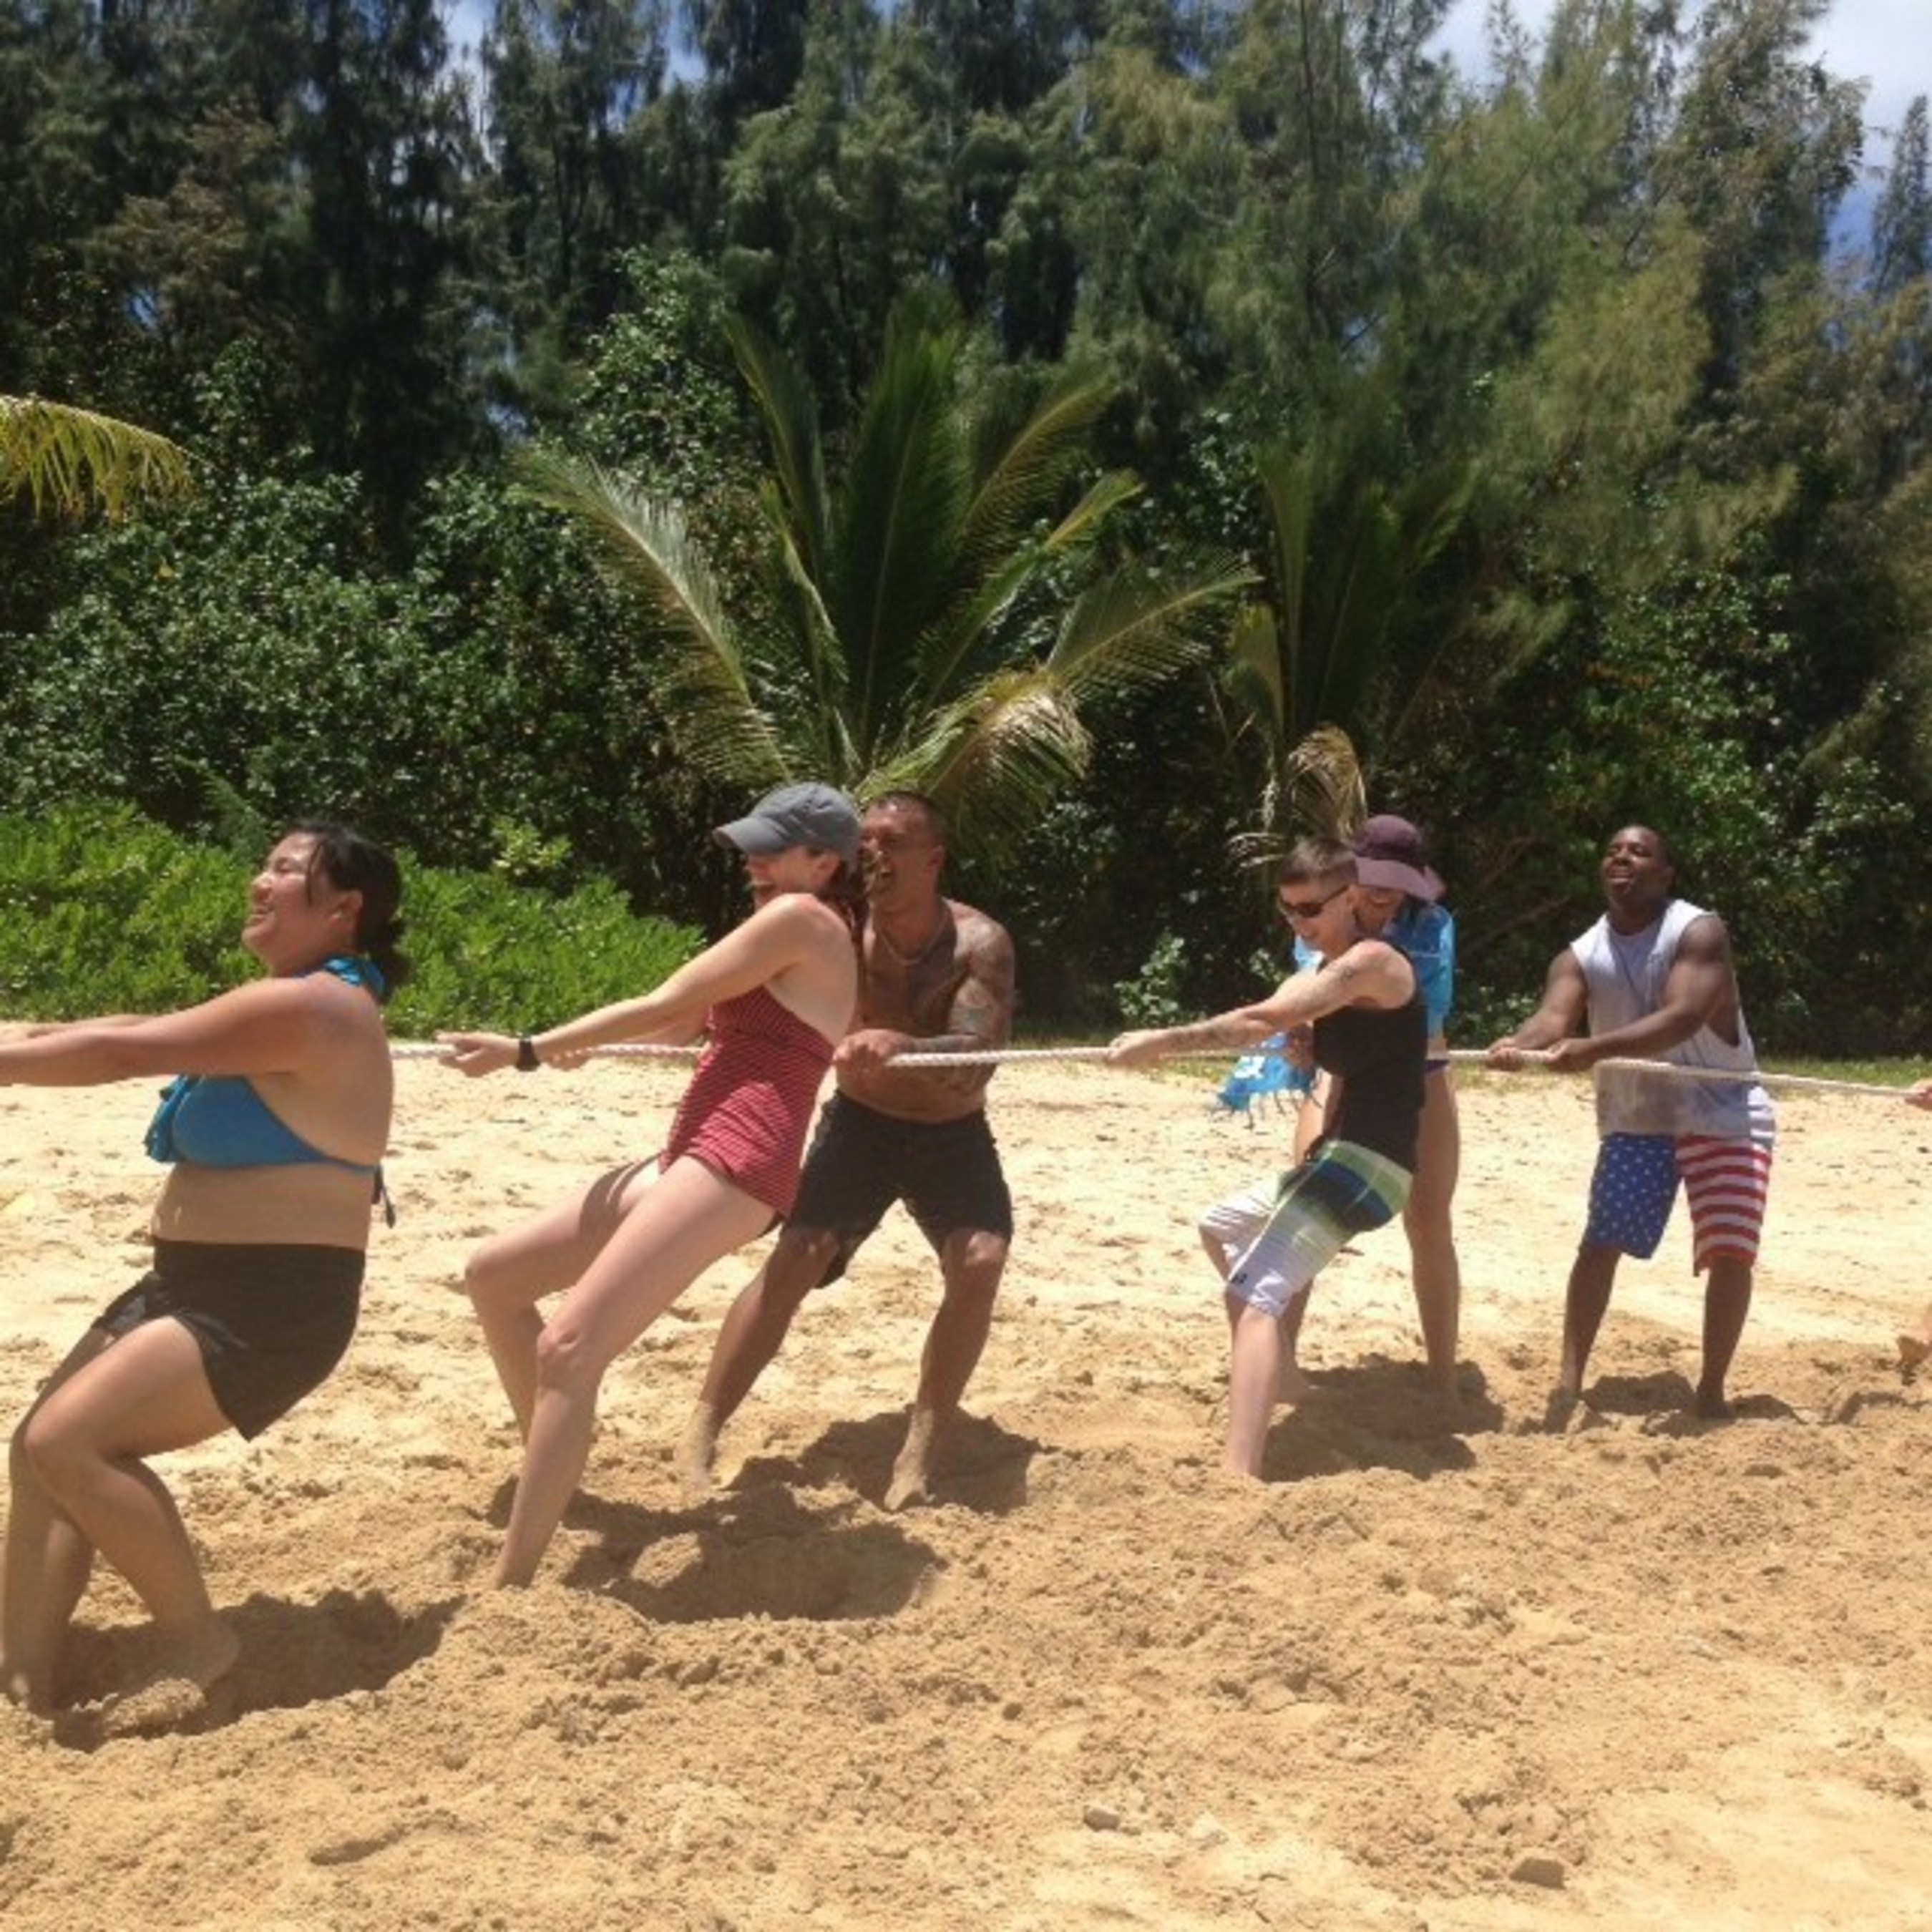 Warriors and family members participated in several competitive activities - including tug of war - at Kualoa Ranch's Secret Island.